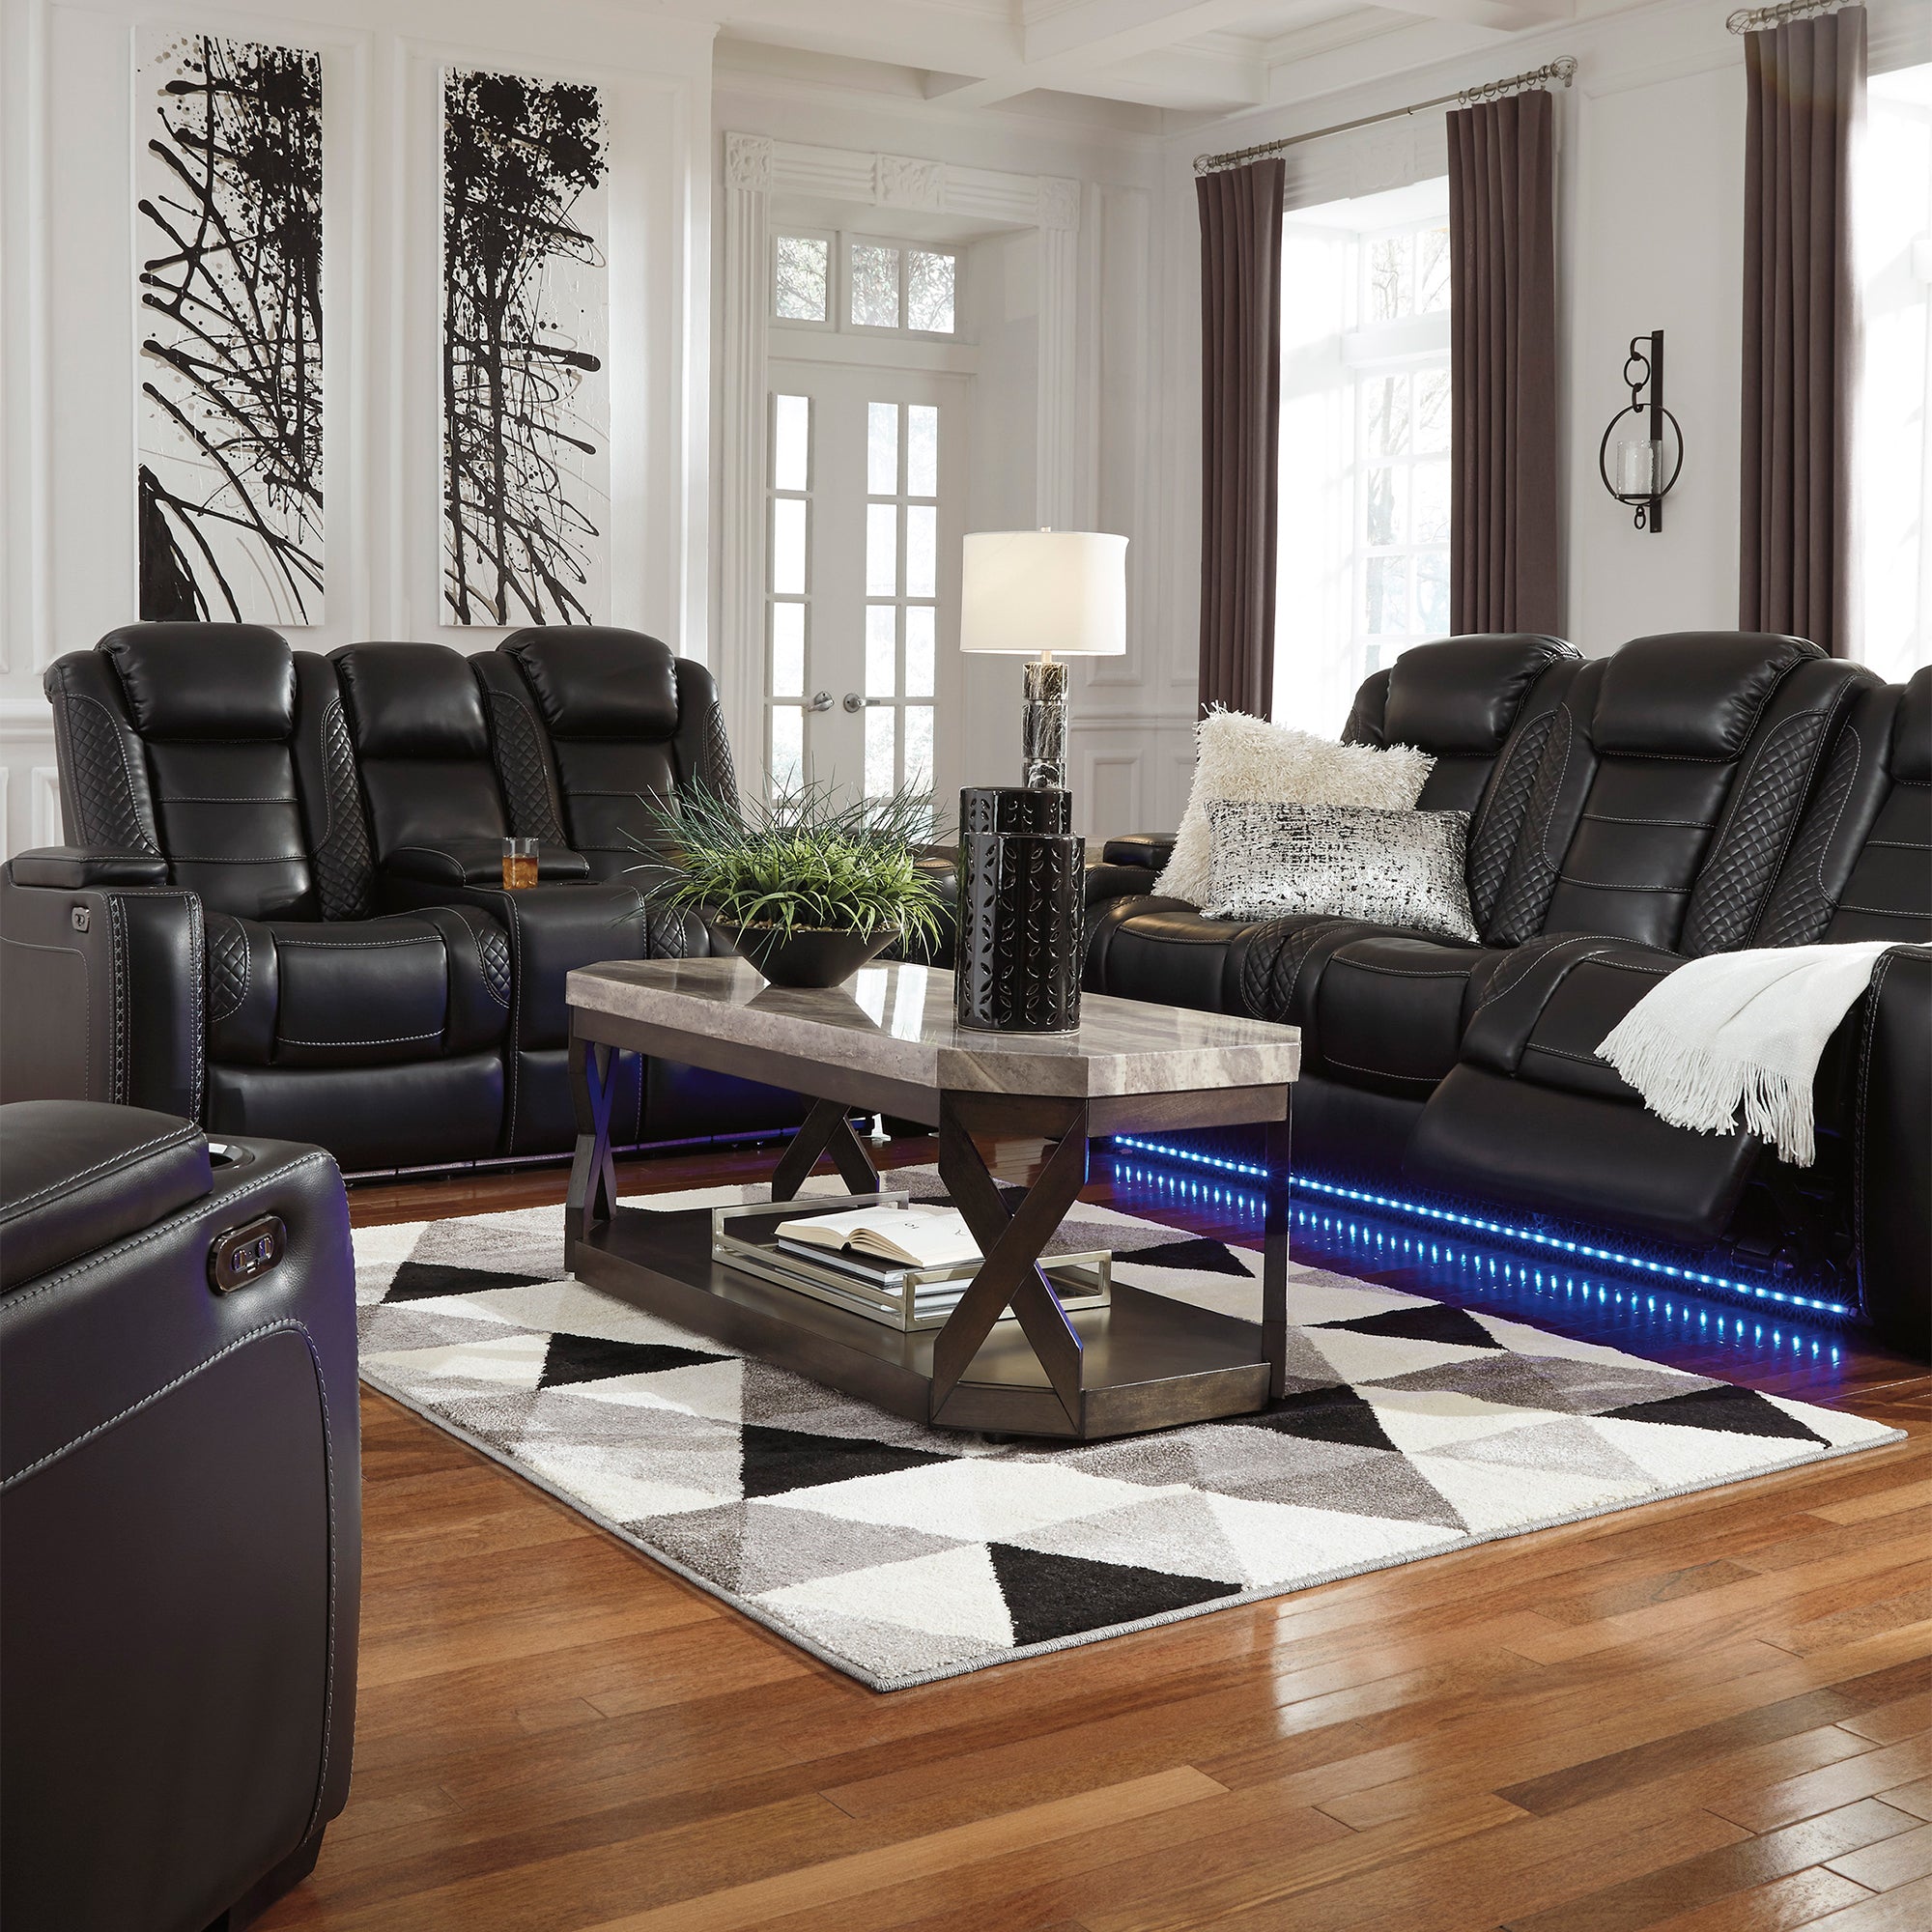 Party Time Power Reclining Sofa and Loveseat